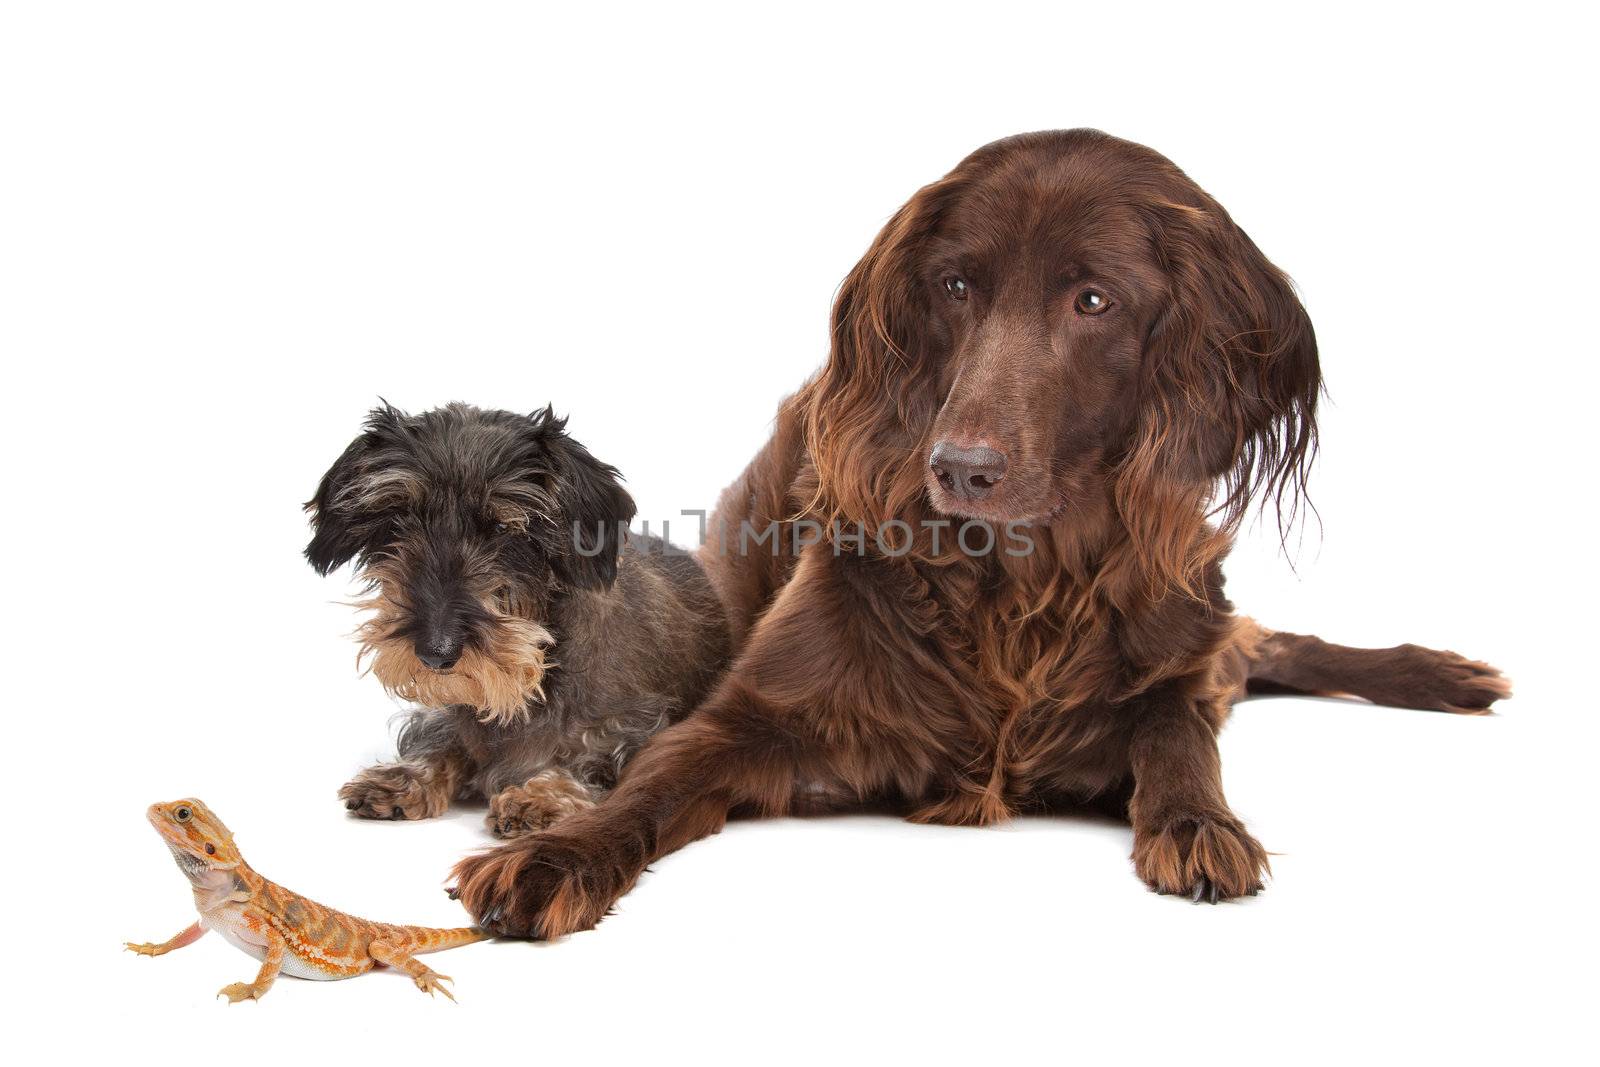 two dogs and a lizard in front of a white background